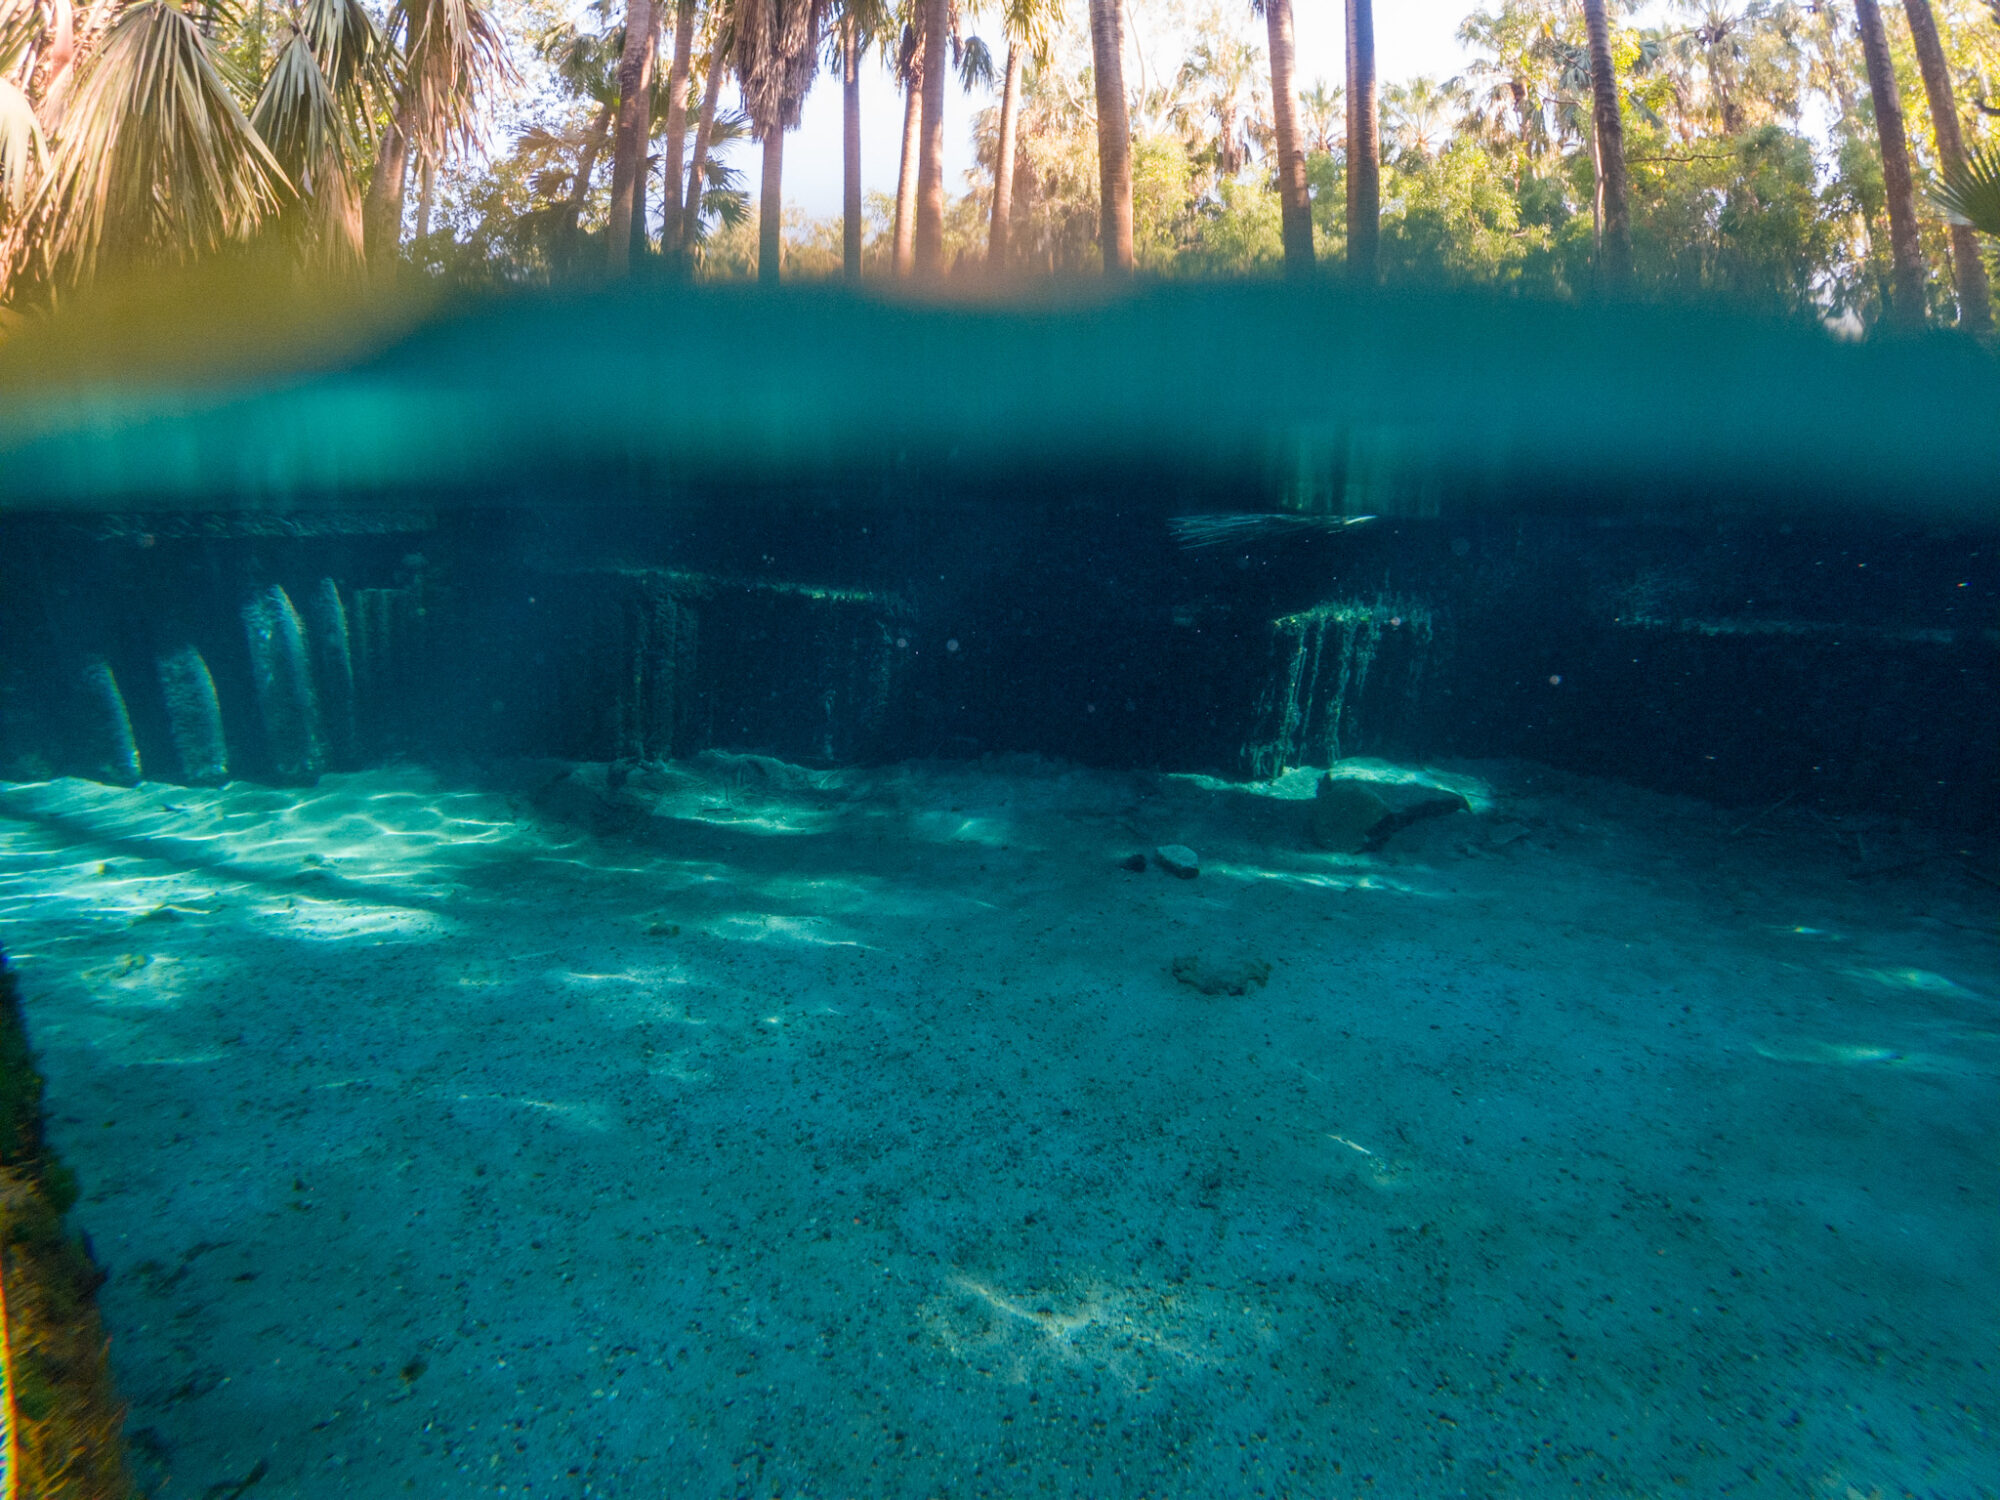 A view of a waterhole mostly underwater showing the clearness of the water, and a bit of view of the surface with a palm tree forest